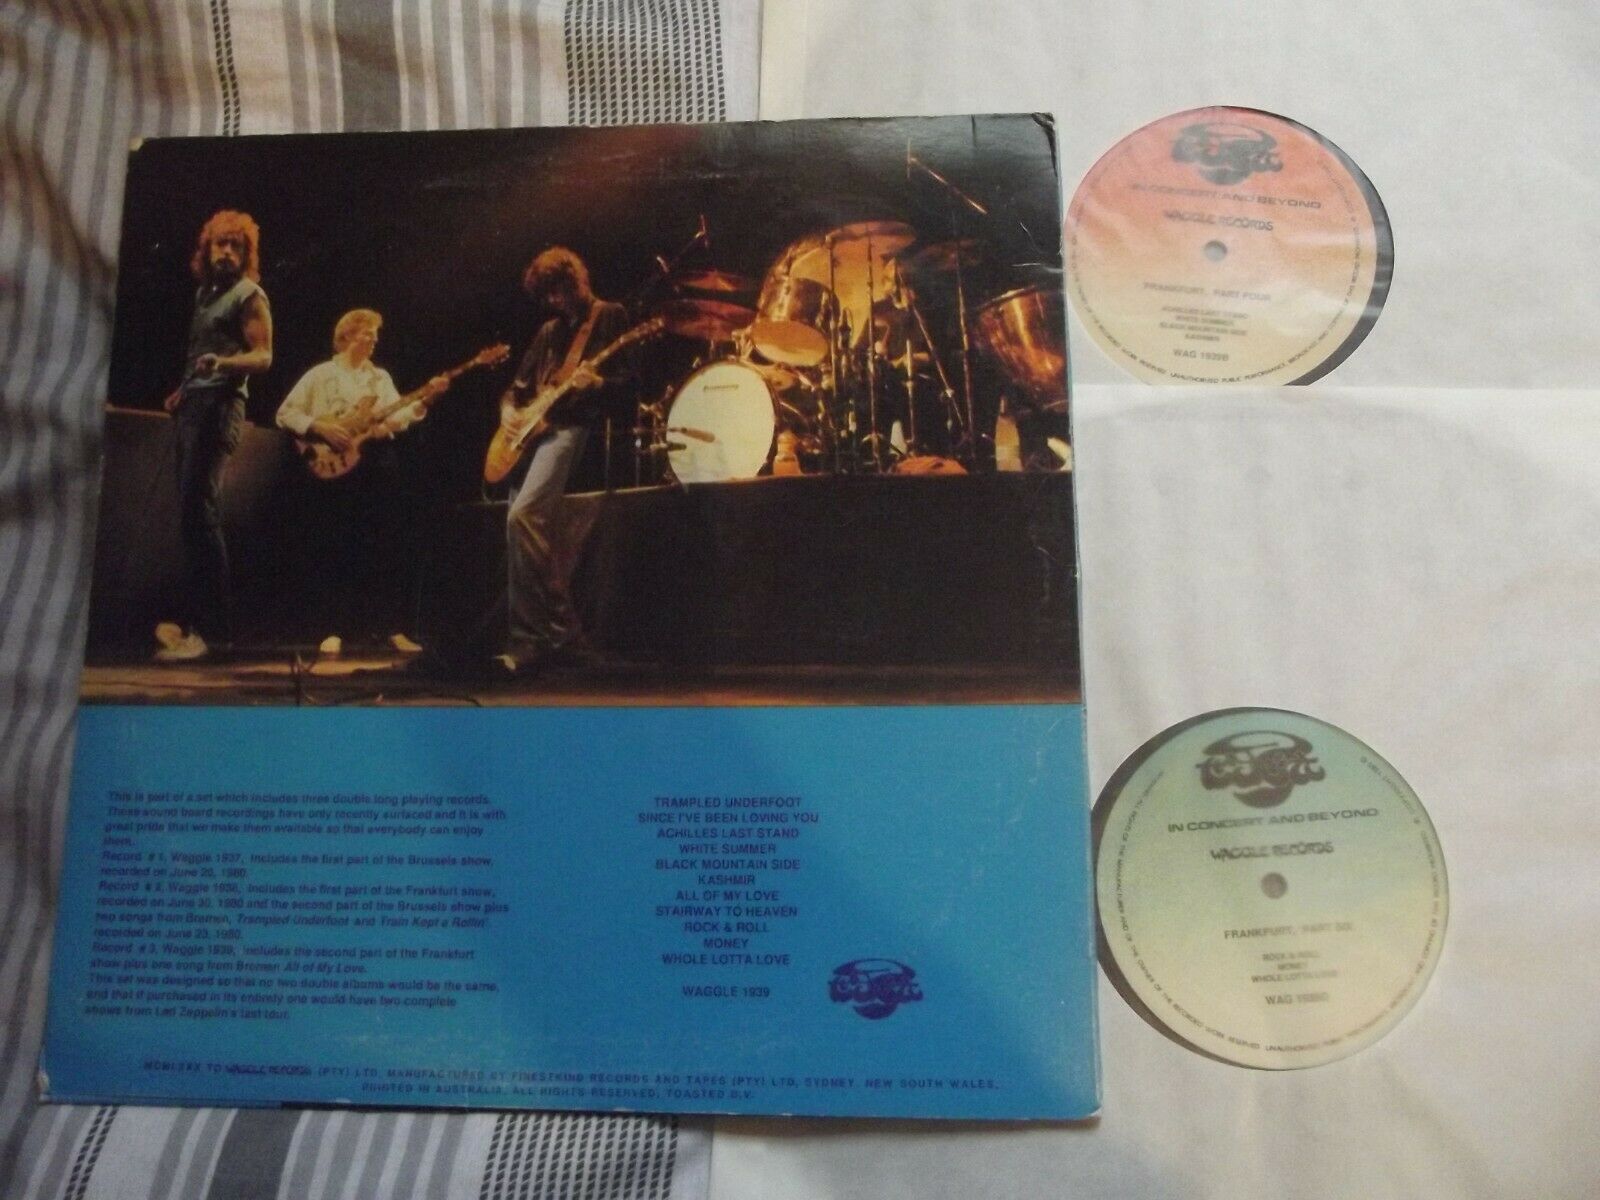 Pic 1 LED ZEPPELIN 2 LP 'DINOSAUR' LIVE IN GERMANY 1980.WAGGLE LABEL.NOT TMOQ,TAKRL